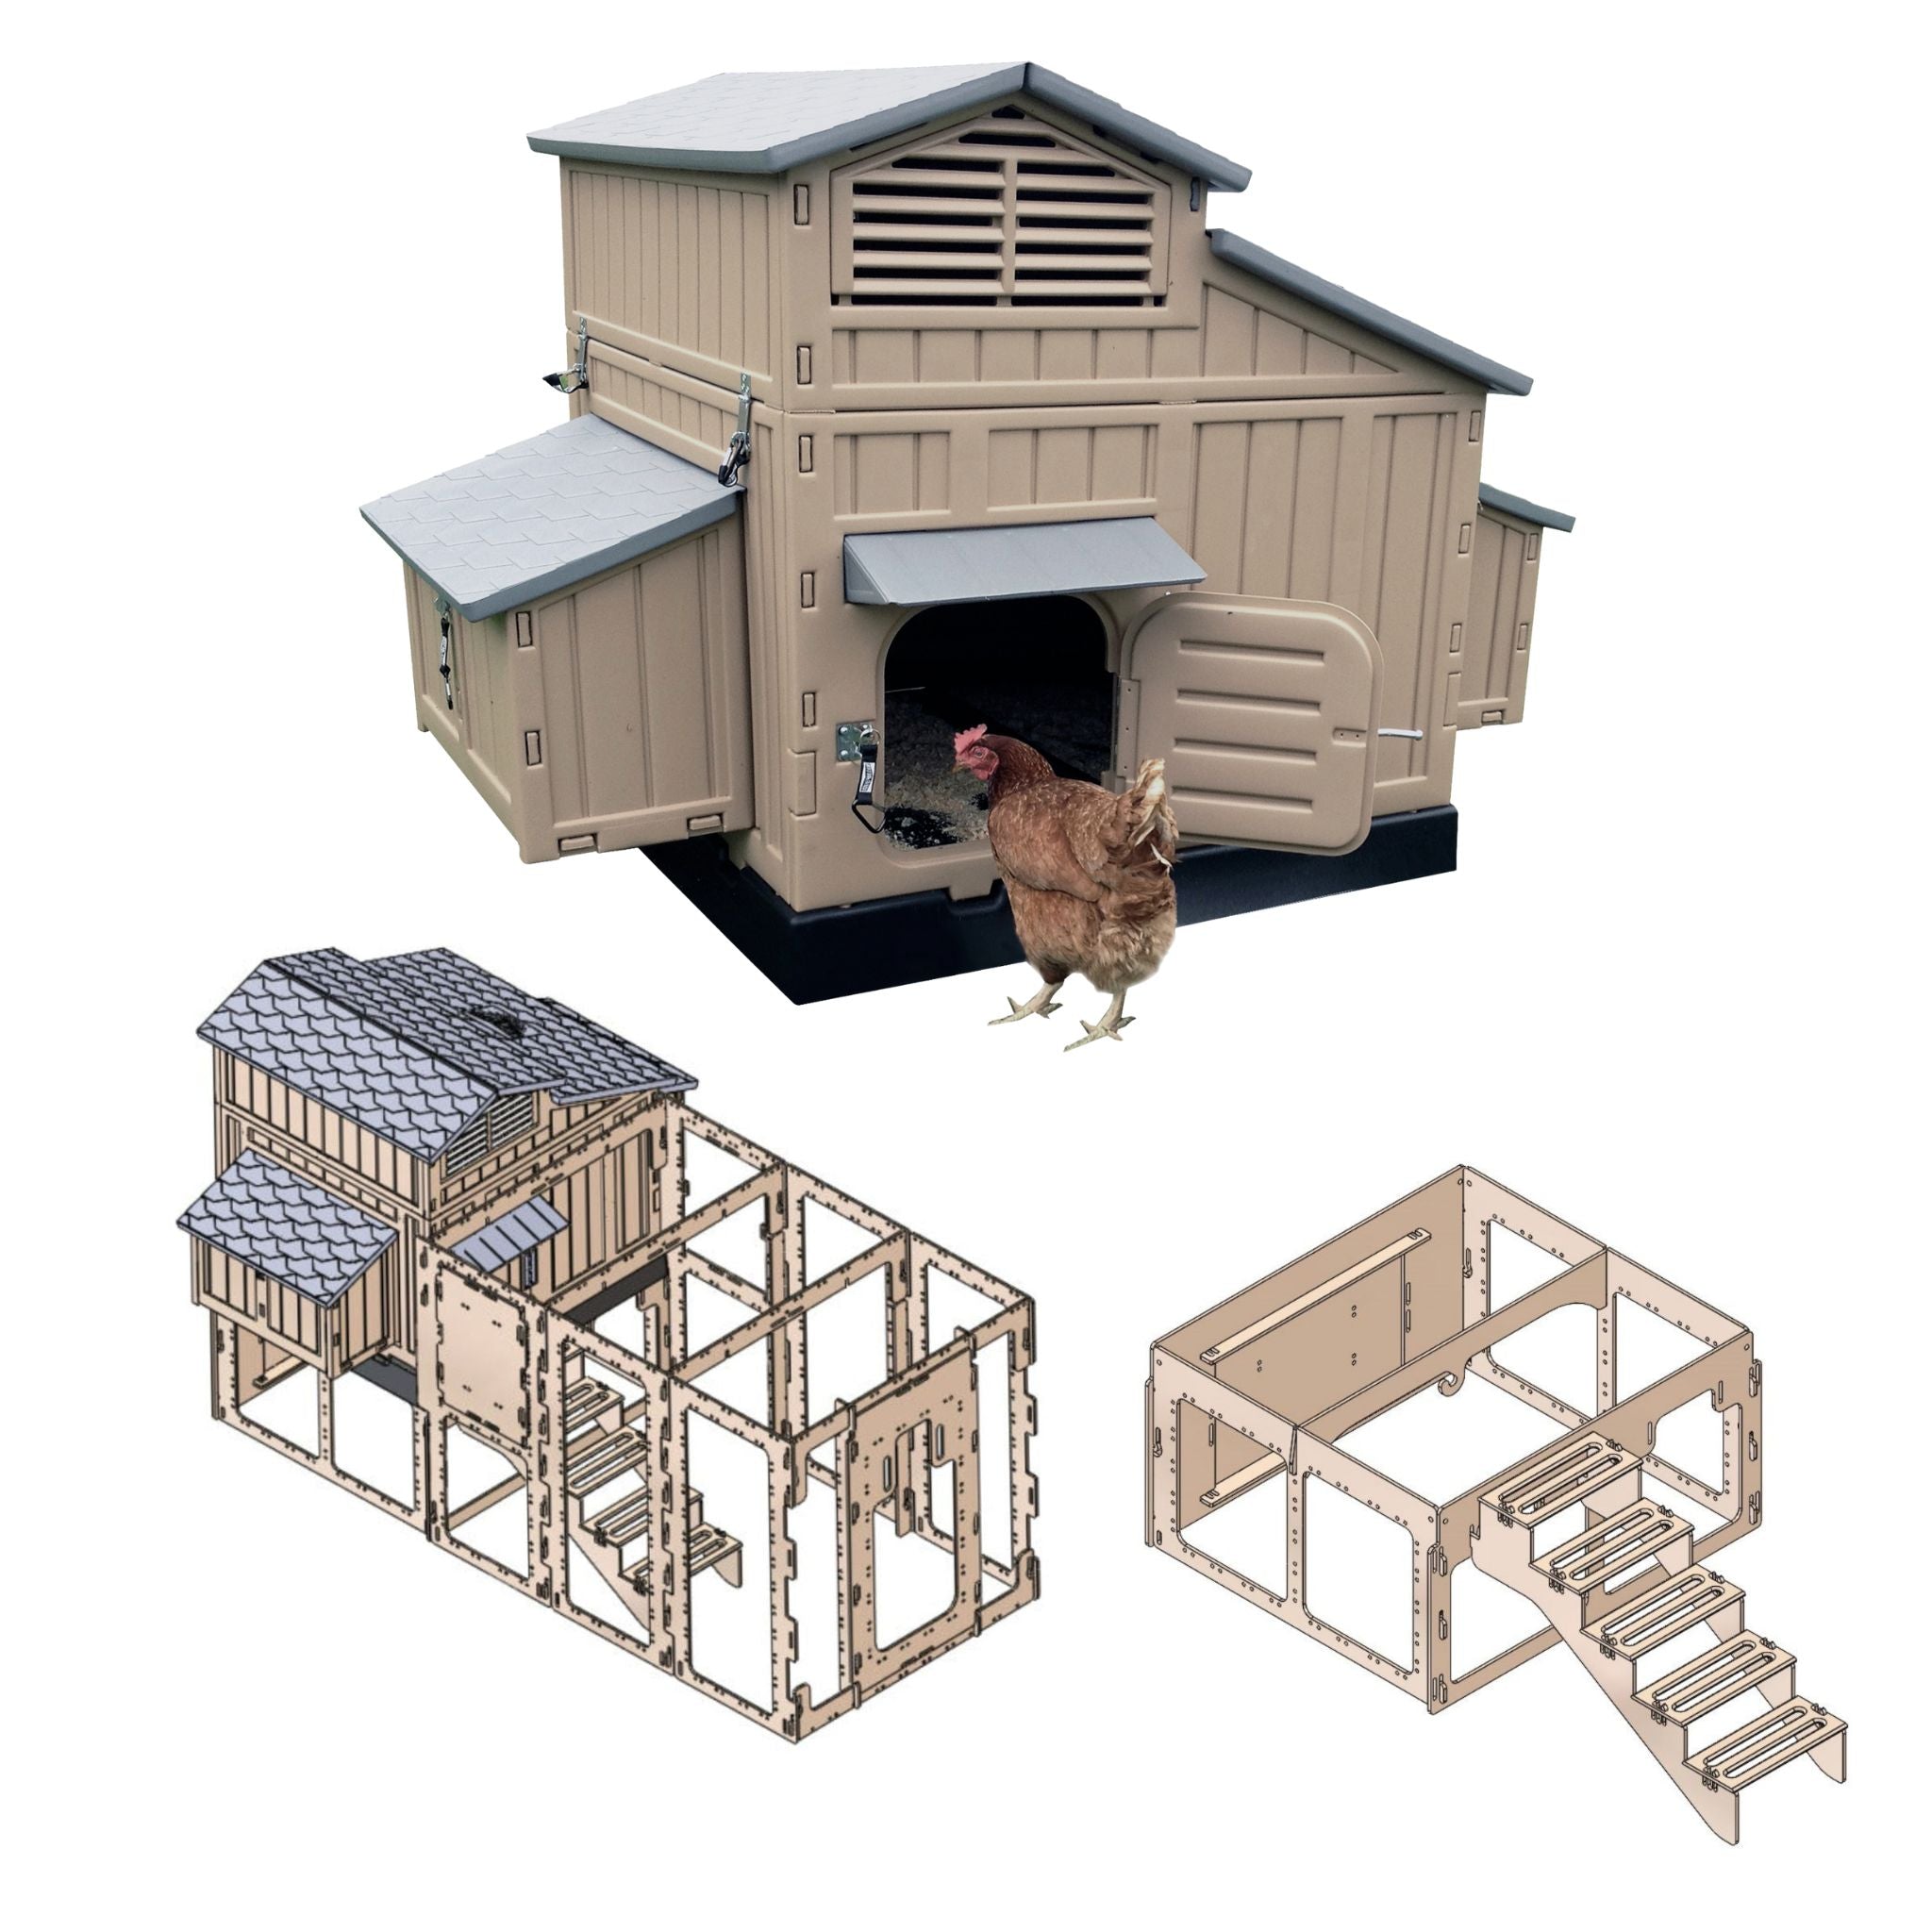 Hatching Time. Large Formex chicken coop with stand and stairs and run. Complete bundle. Chicken can be seen in front of chicken coop for scale.